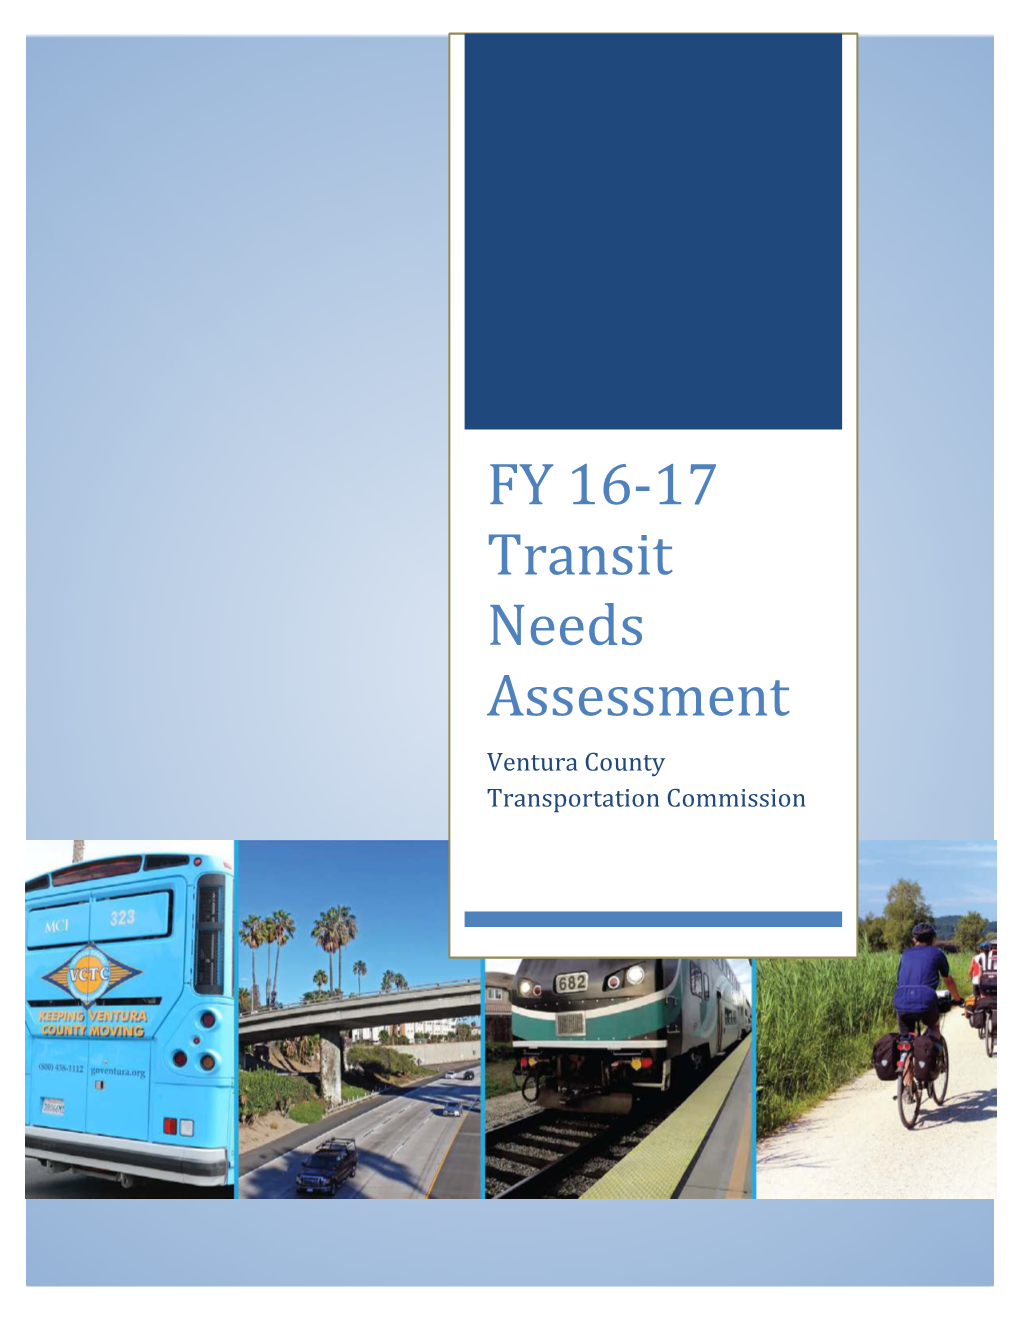 FY 16-17 Transit Needs Assessment Page 1